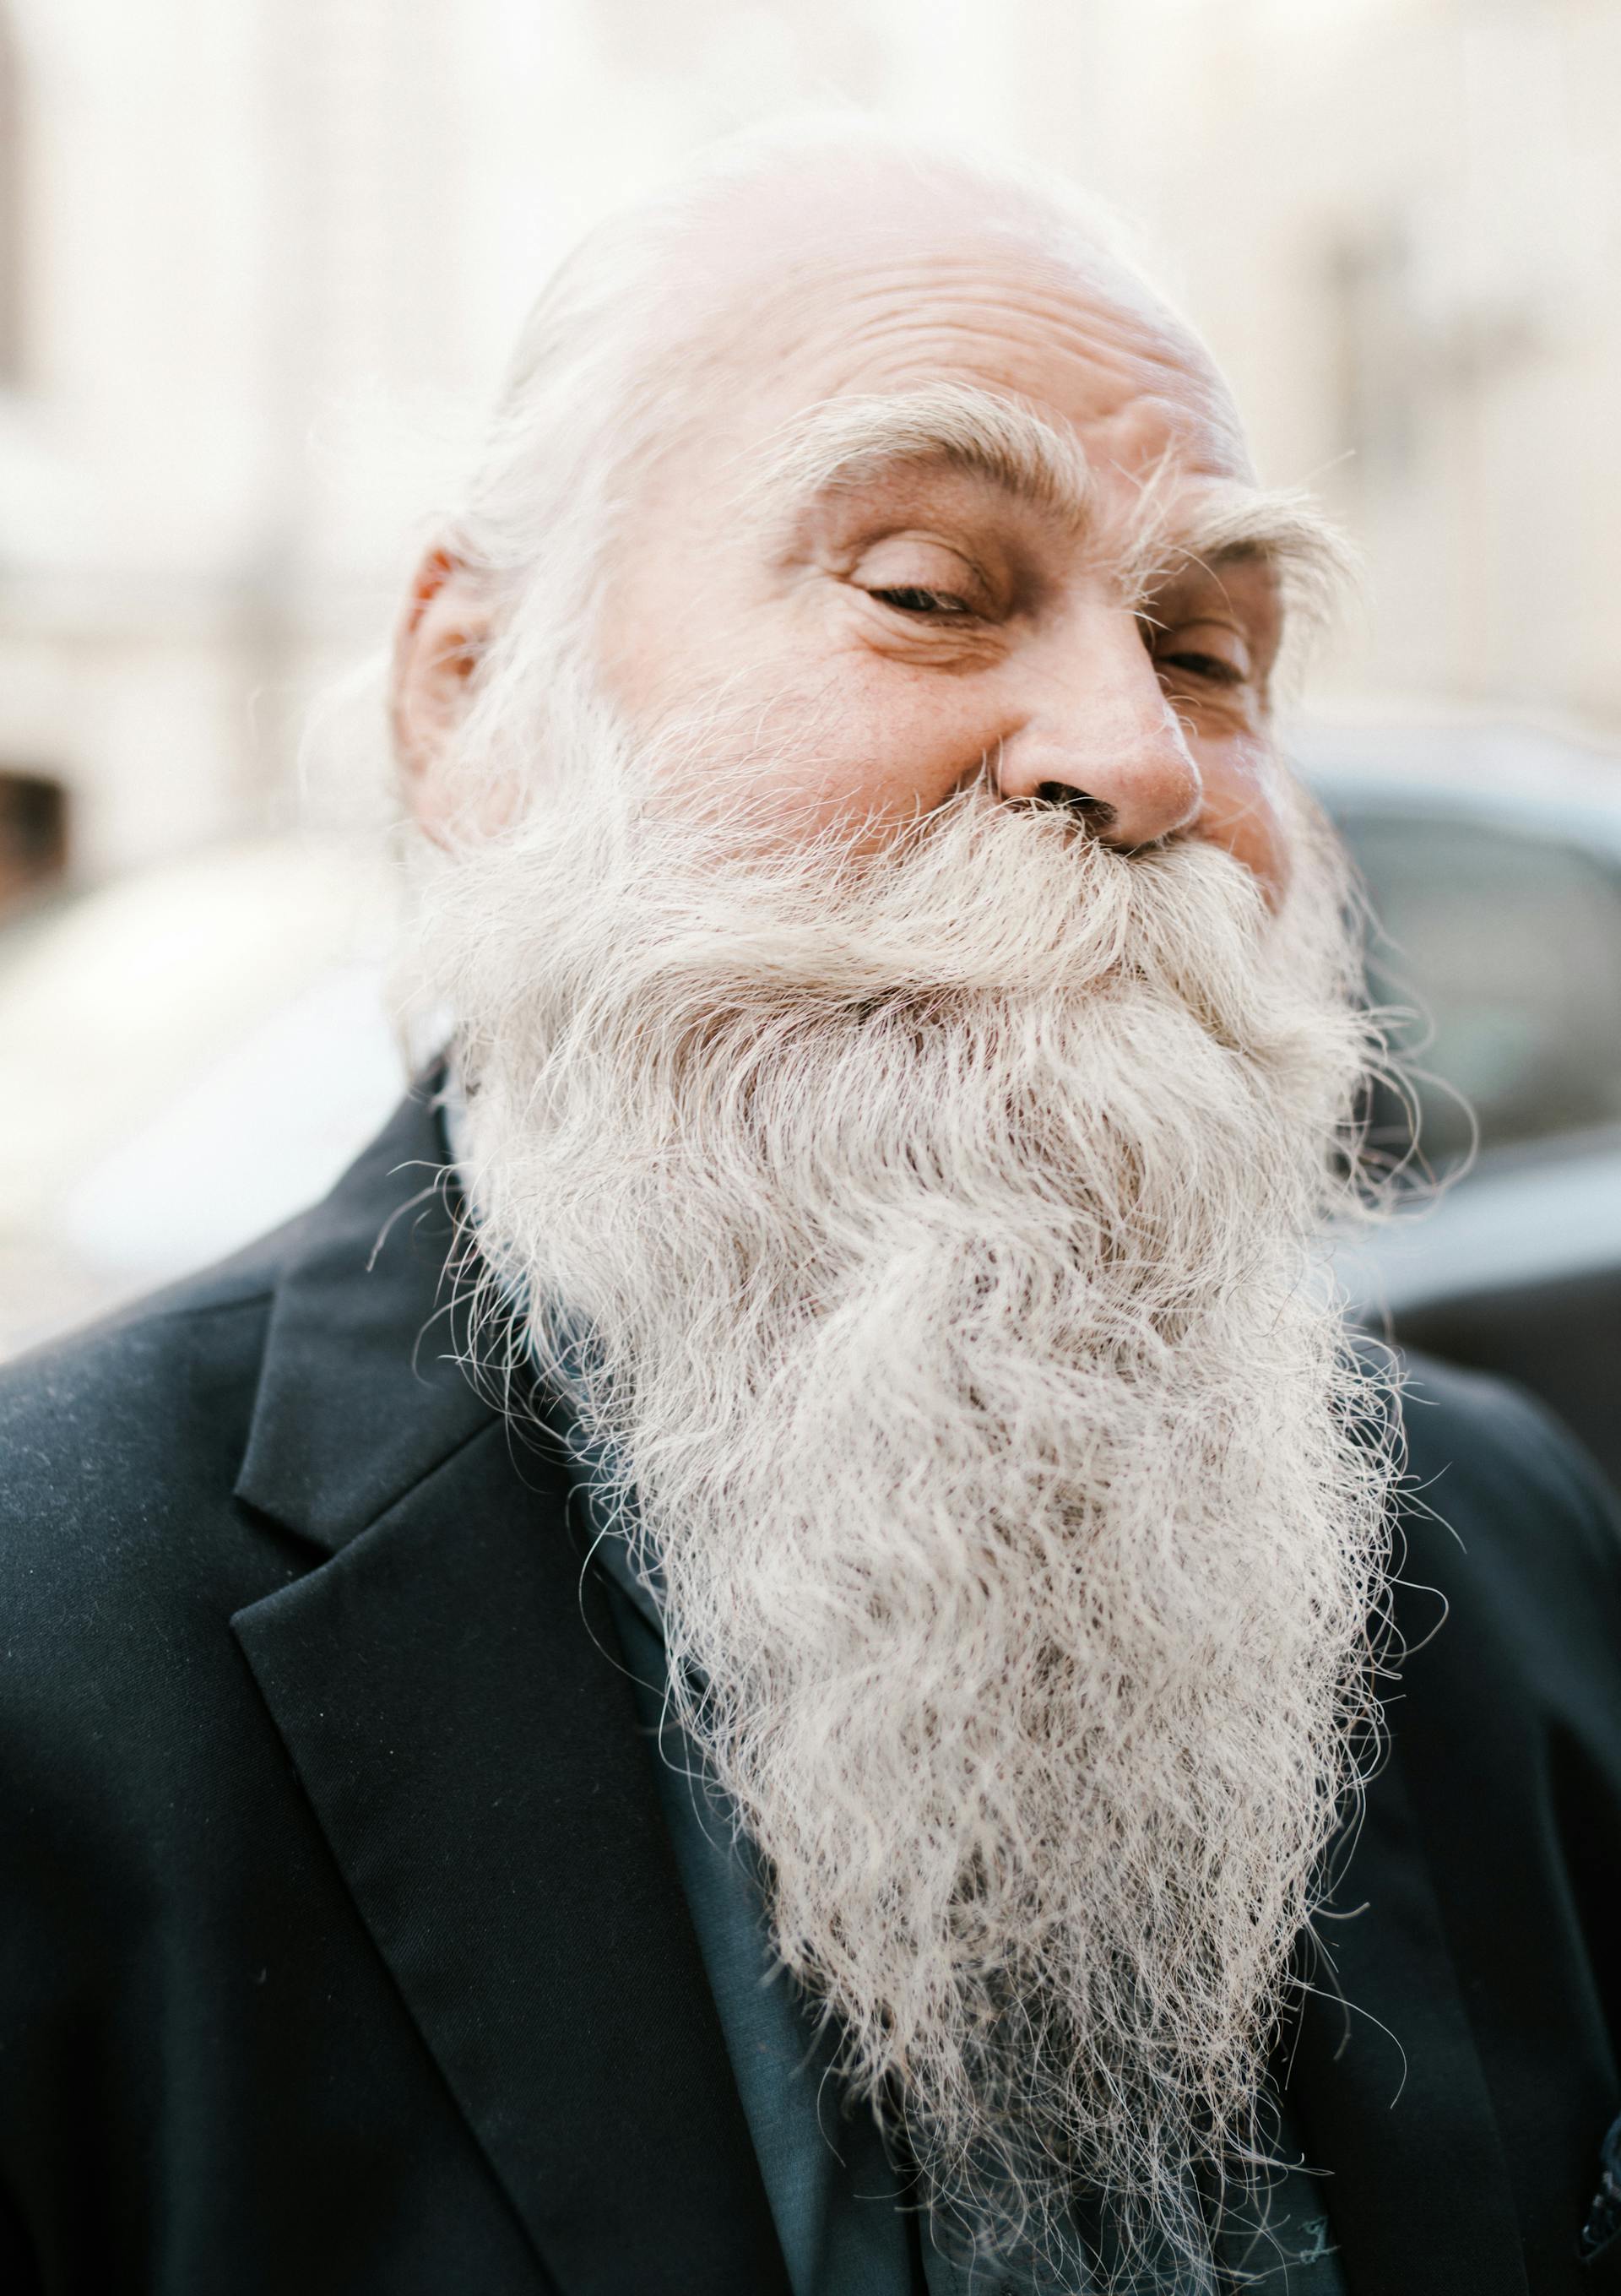 Victoria's old neighbor Mr. Thompson has a hearty laugh | Source: Pexels